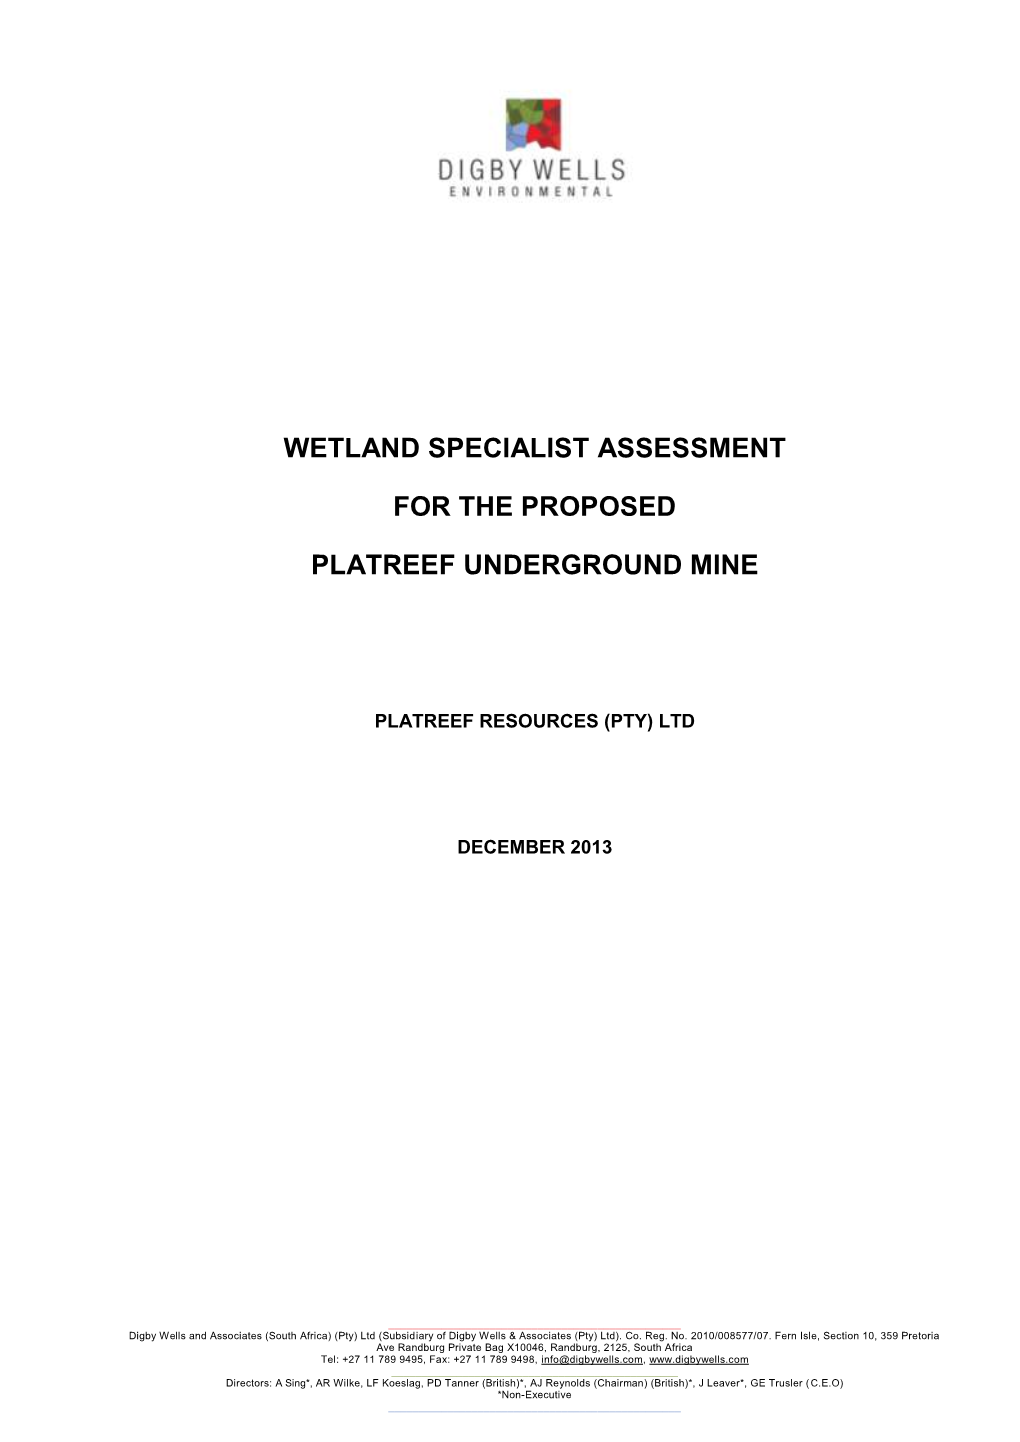 Wetland Specialist Assessment for the Proposed Platreef Underground Mine